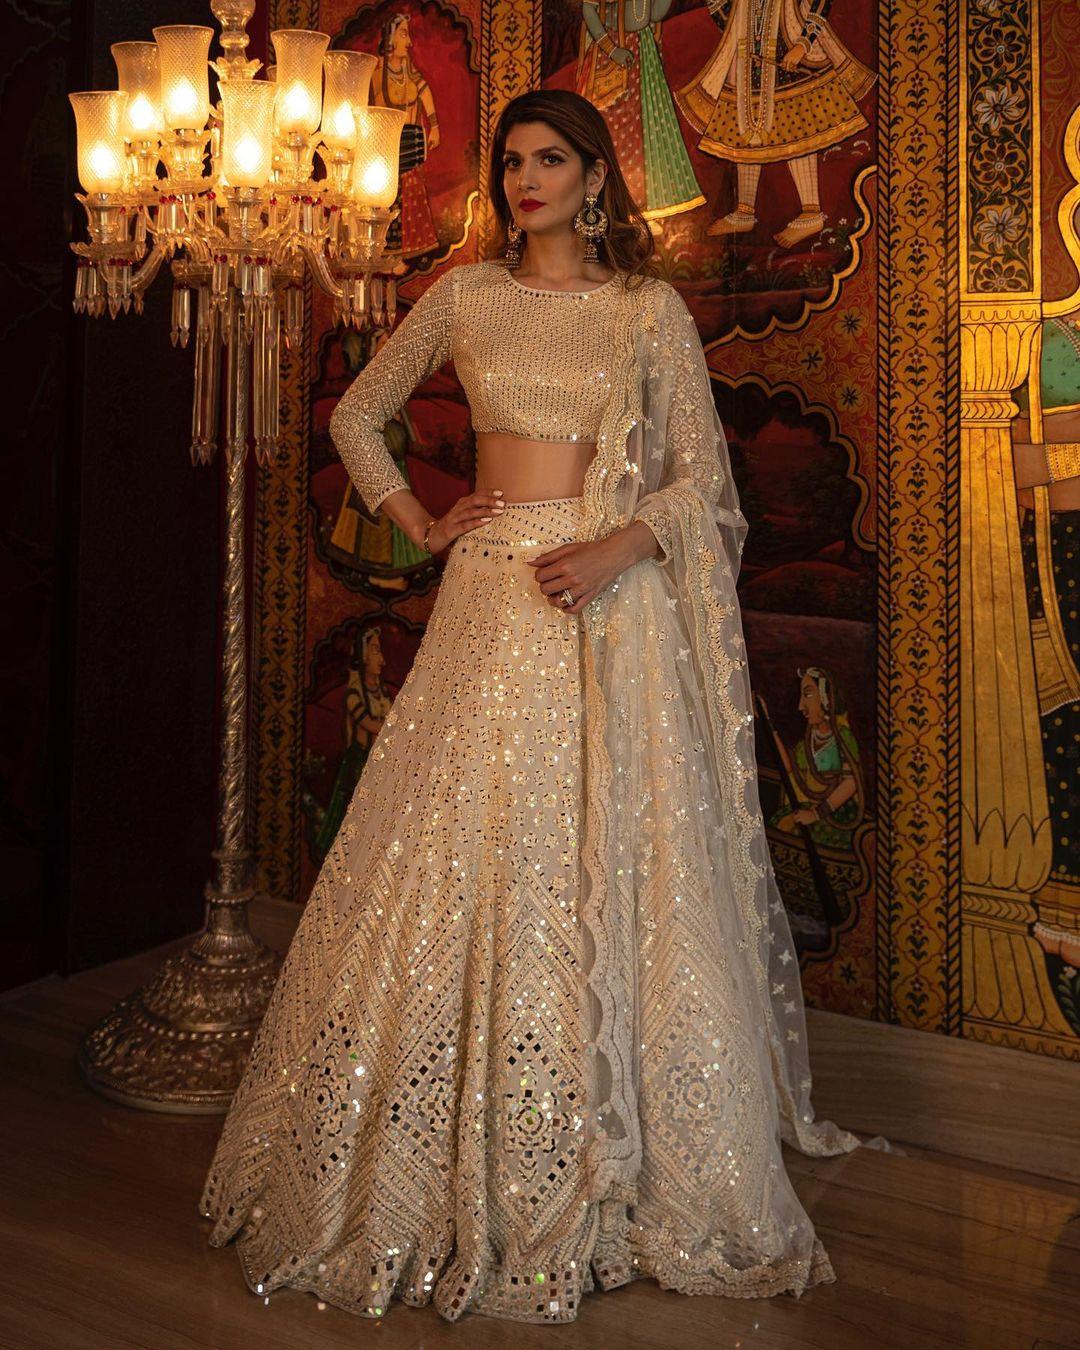 Sonam Kapoor Looks Divine In An Ivory And Gold Lehenga At Her Sangeet  Ceremony